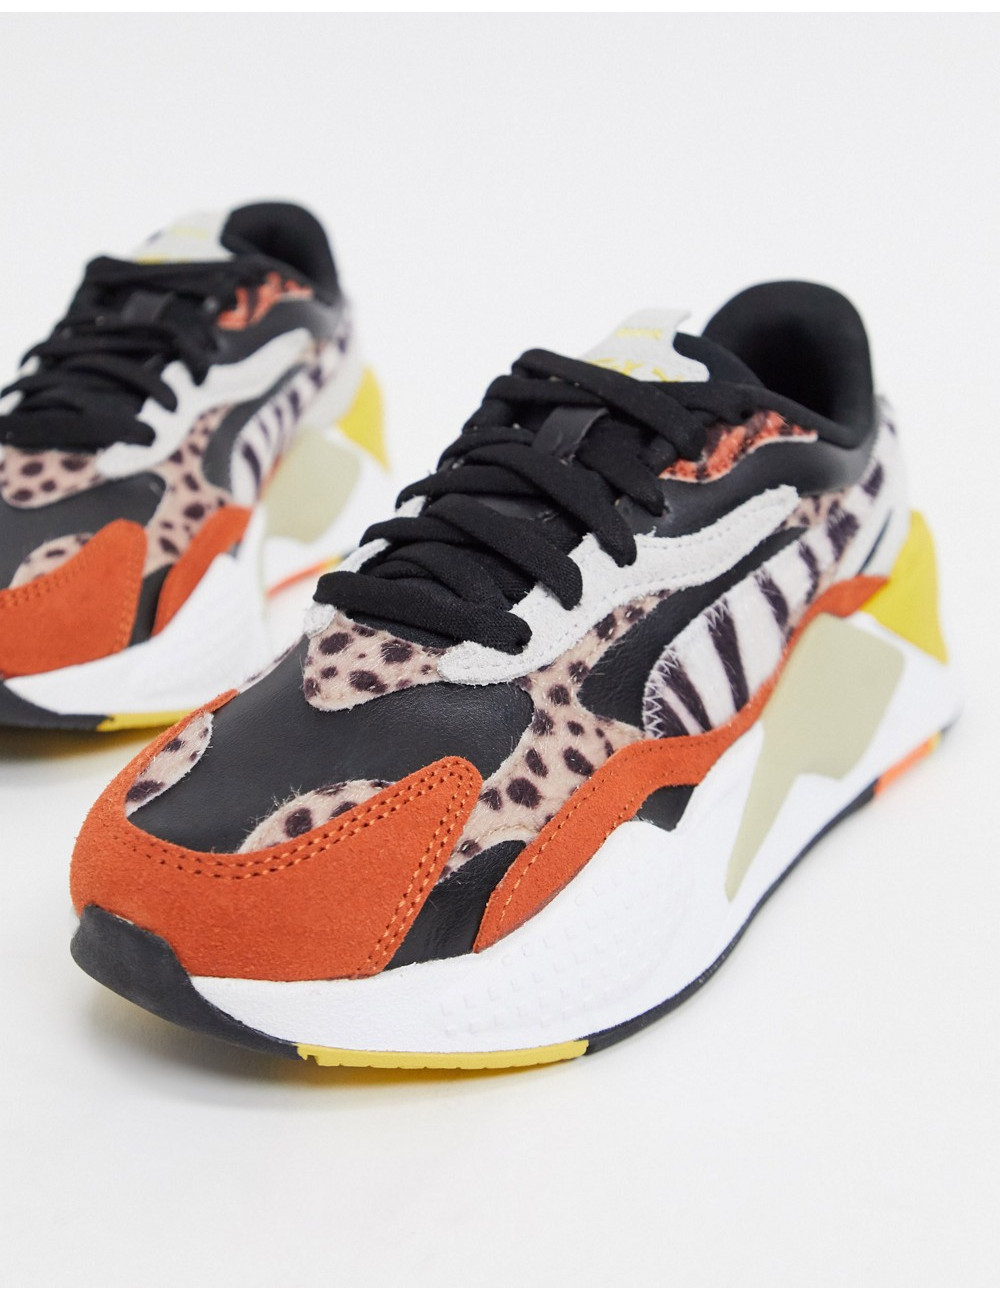 Puma RS-X3 trainers in...